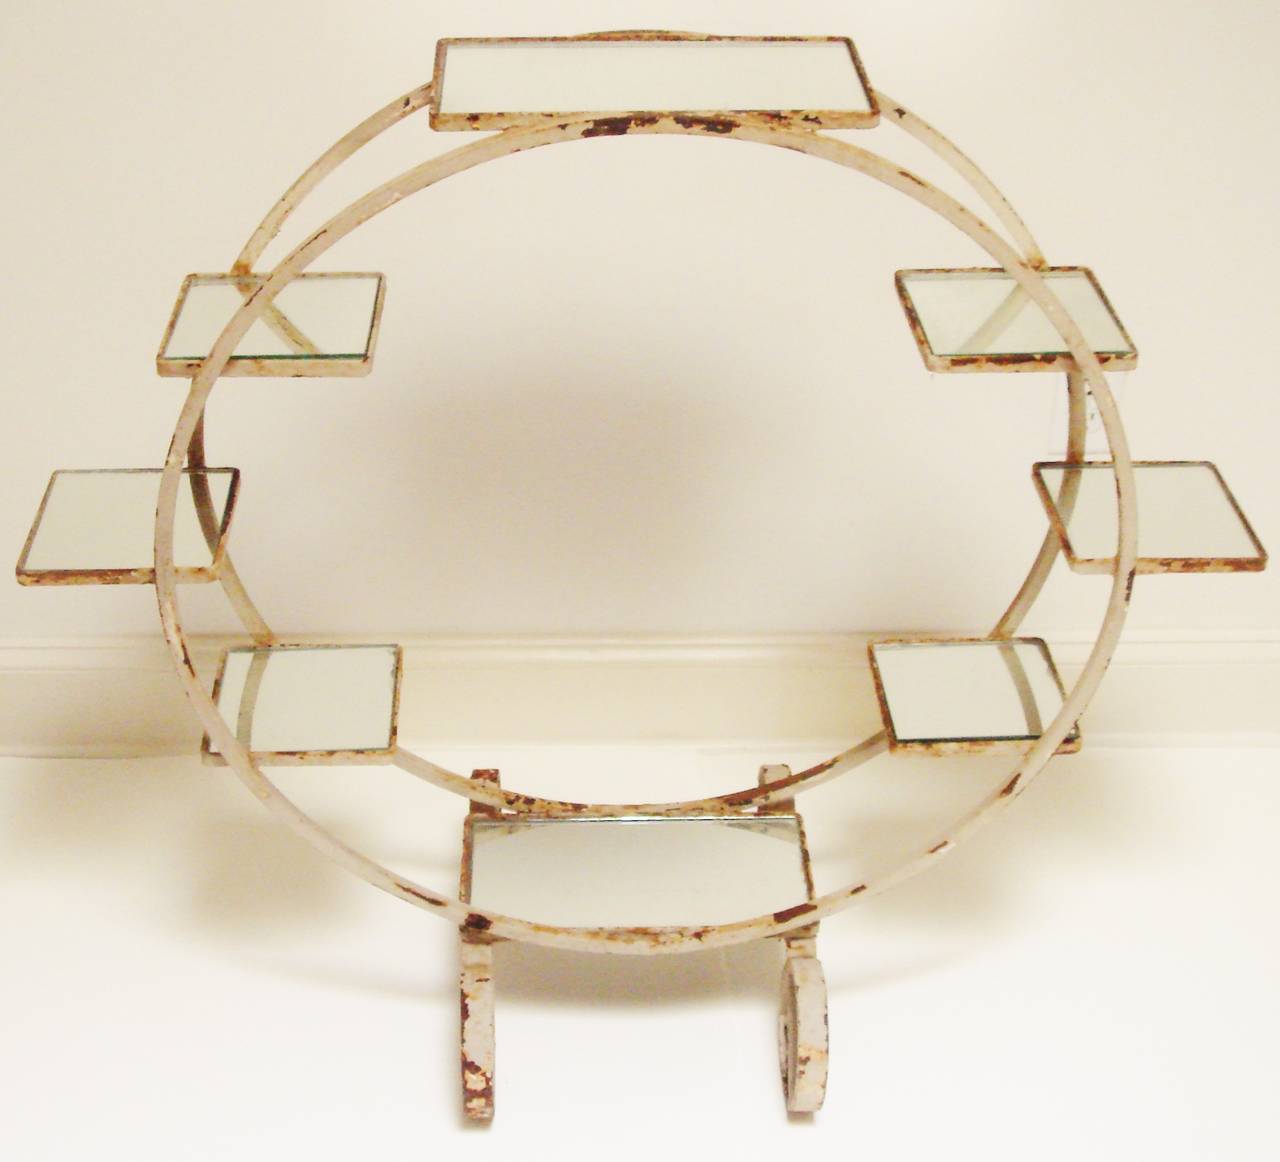 This stunning American Art Deco painted circular iron garden or conservatory plant etagere is designed like a stationary carousel. It has six mirror lined square shelves that range around the circumference of the double circles plus two double sized